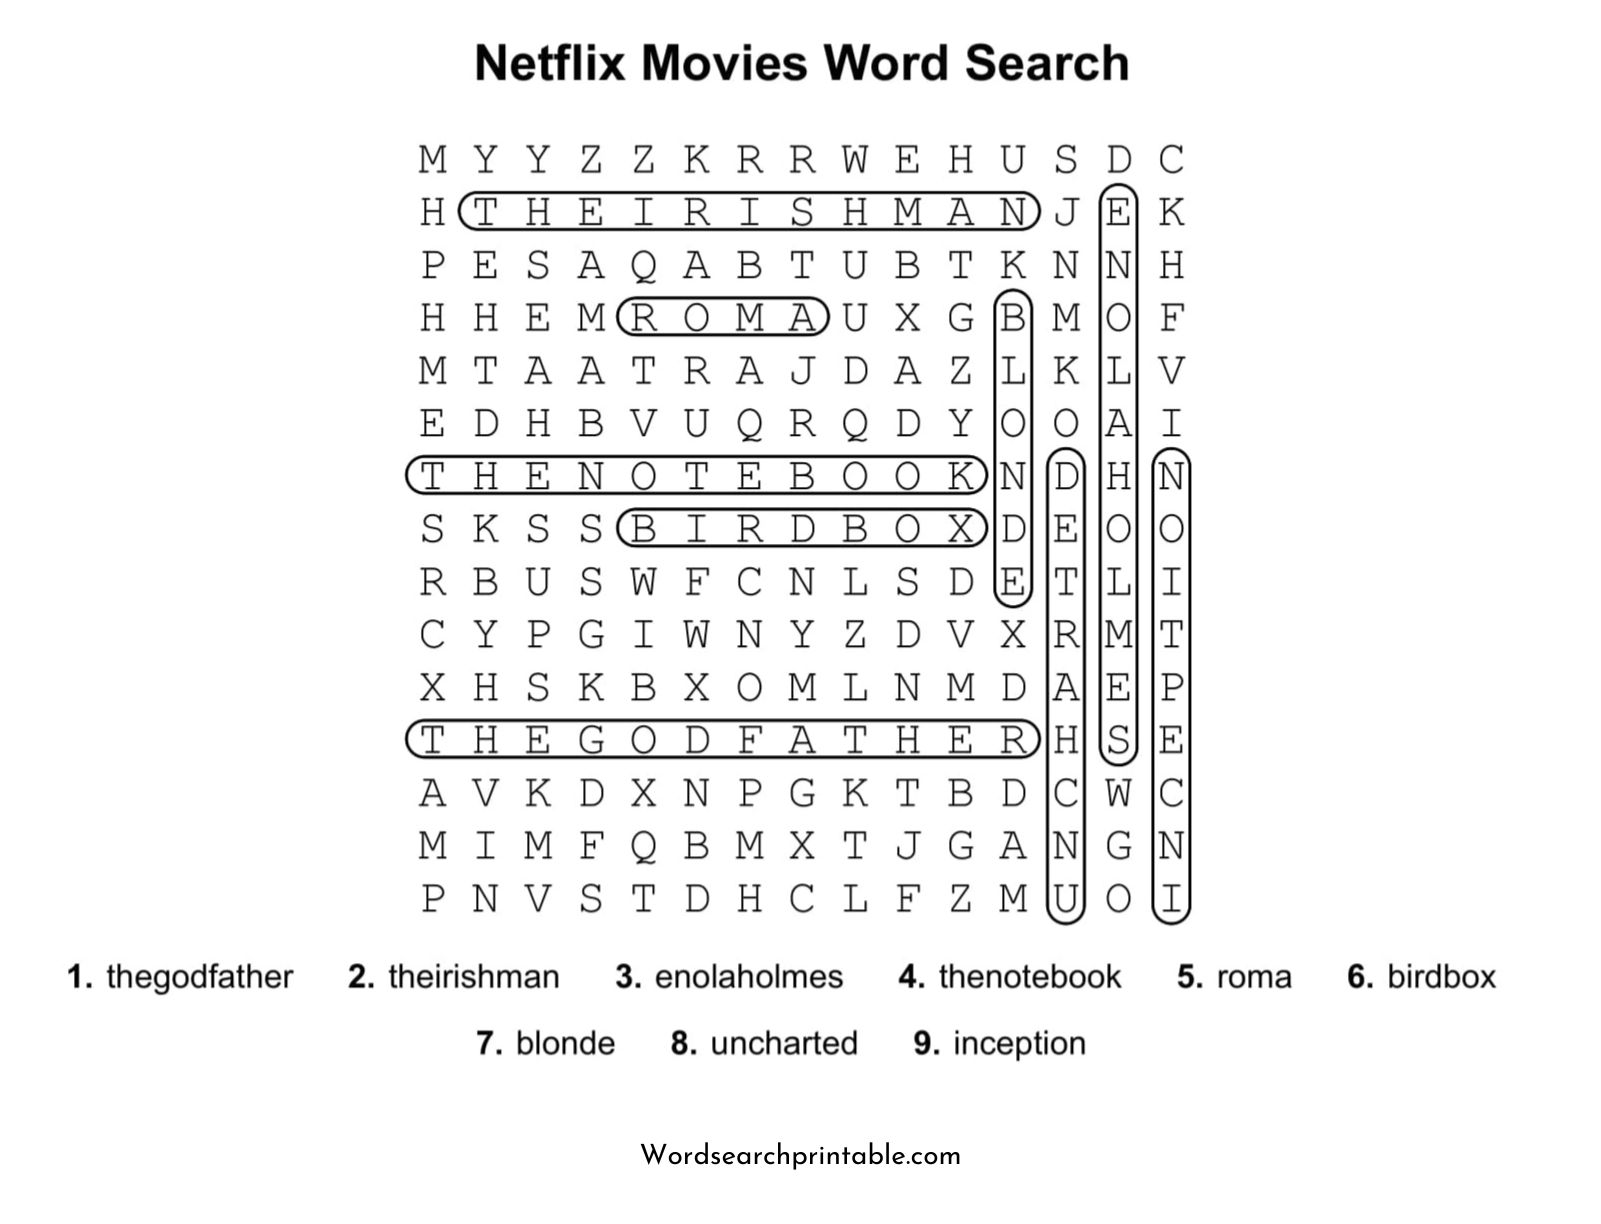 netflix movies word search puzzle solution